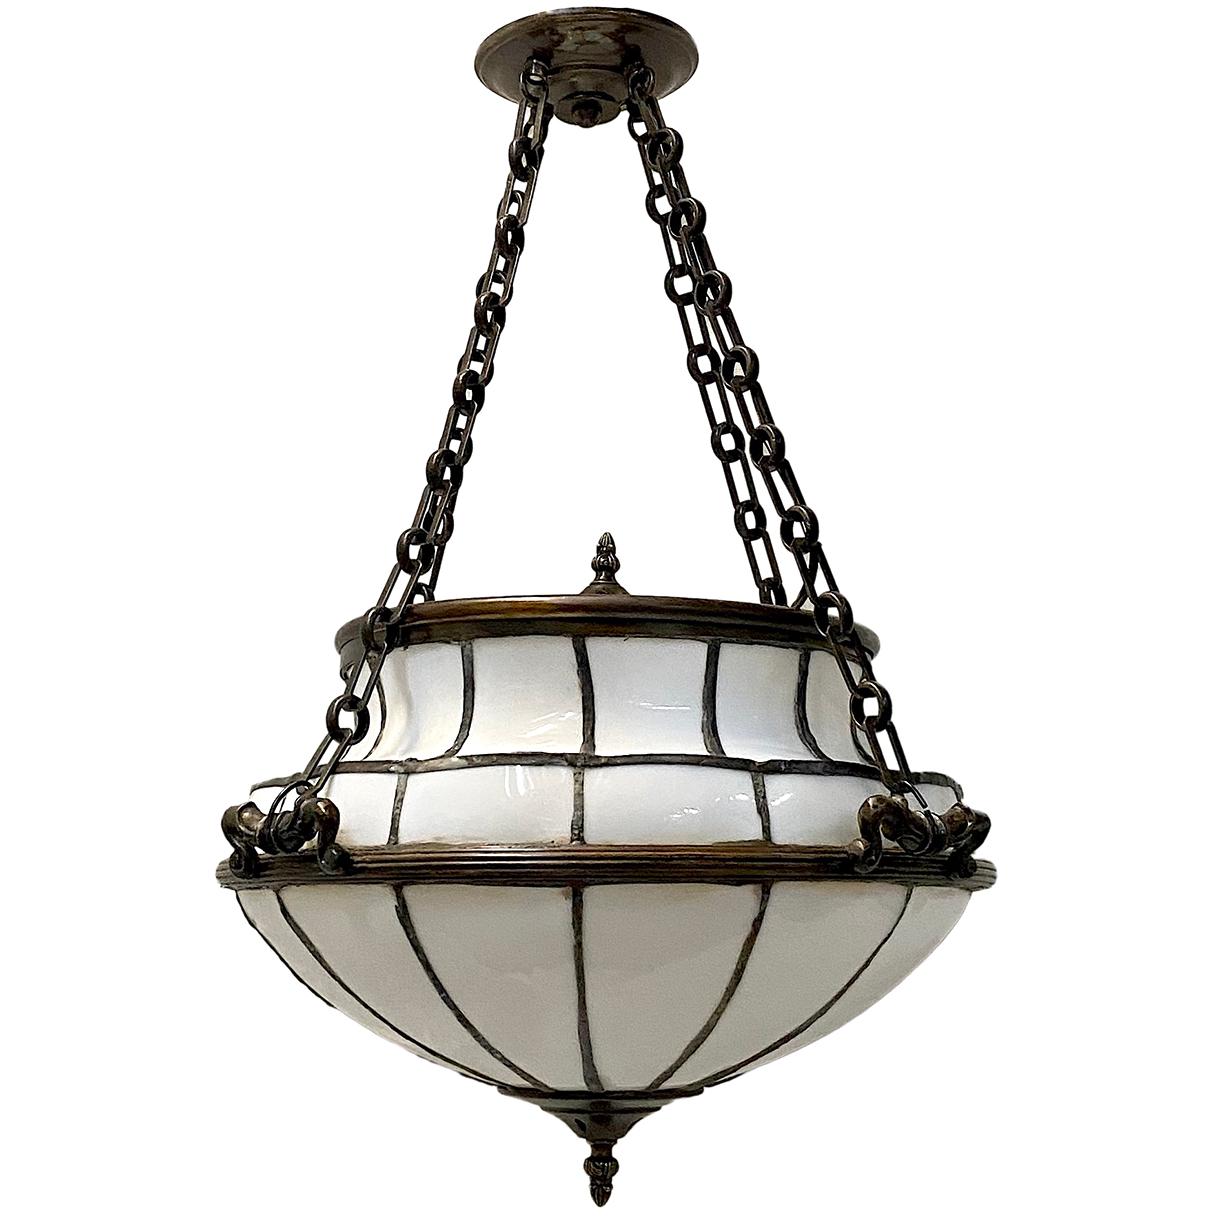 Pair of English, 1920s light fixtures with 6 interior lights. The body of the fixtures with three handles that hold three chains. 
Measurements:
19